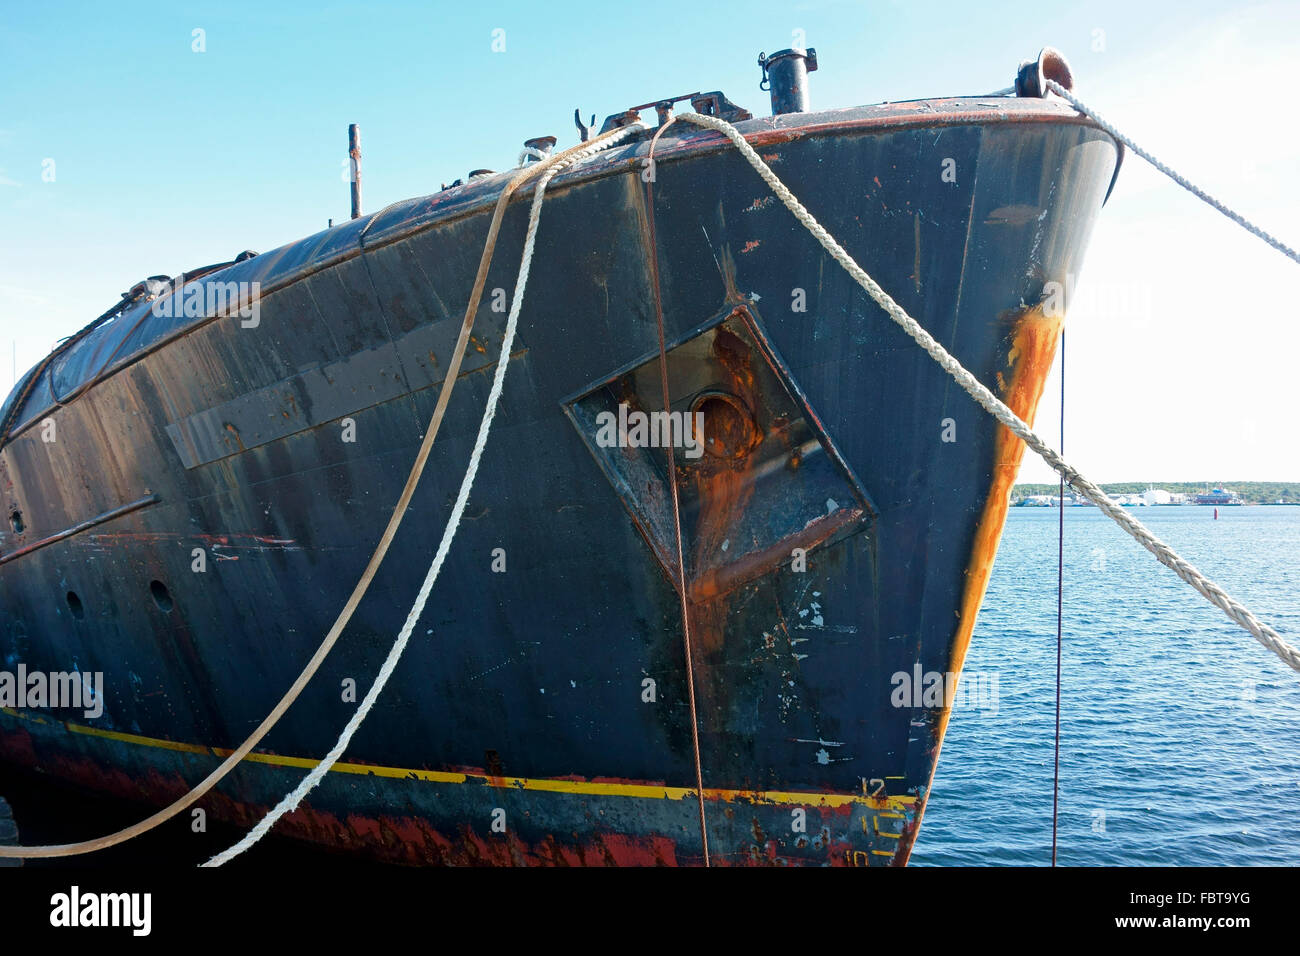 The derelict ship RV Farley Mowat sitting at the wharf at Shelburne, Nova Scotia after being stripped for scrap. Stock Photo